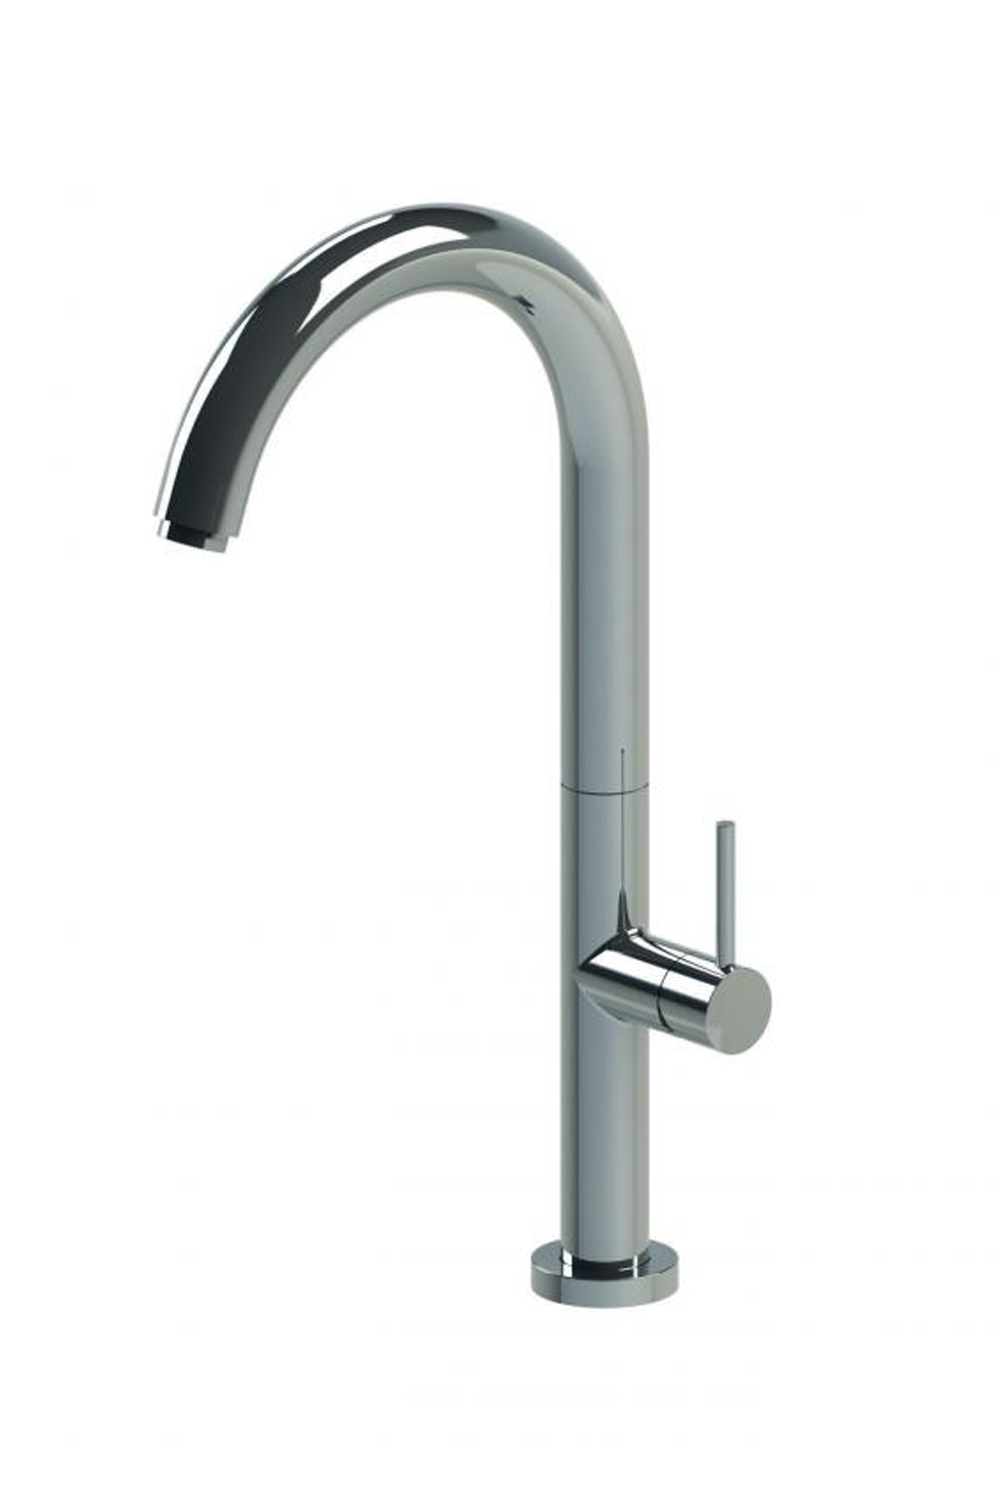 LUISINA RC702N single lever kitchen sink mixer | Made in Italy |